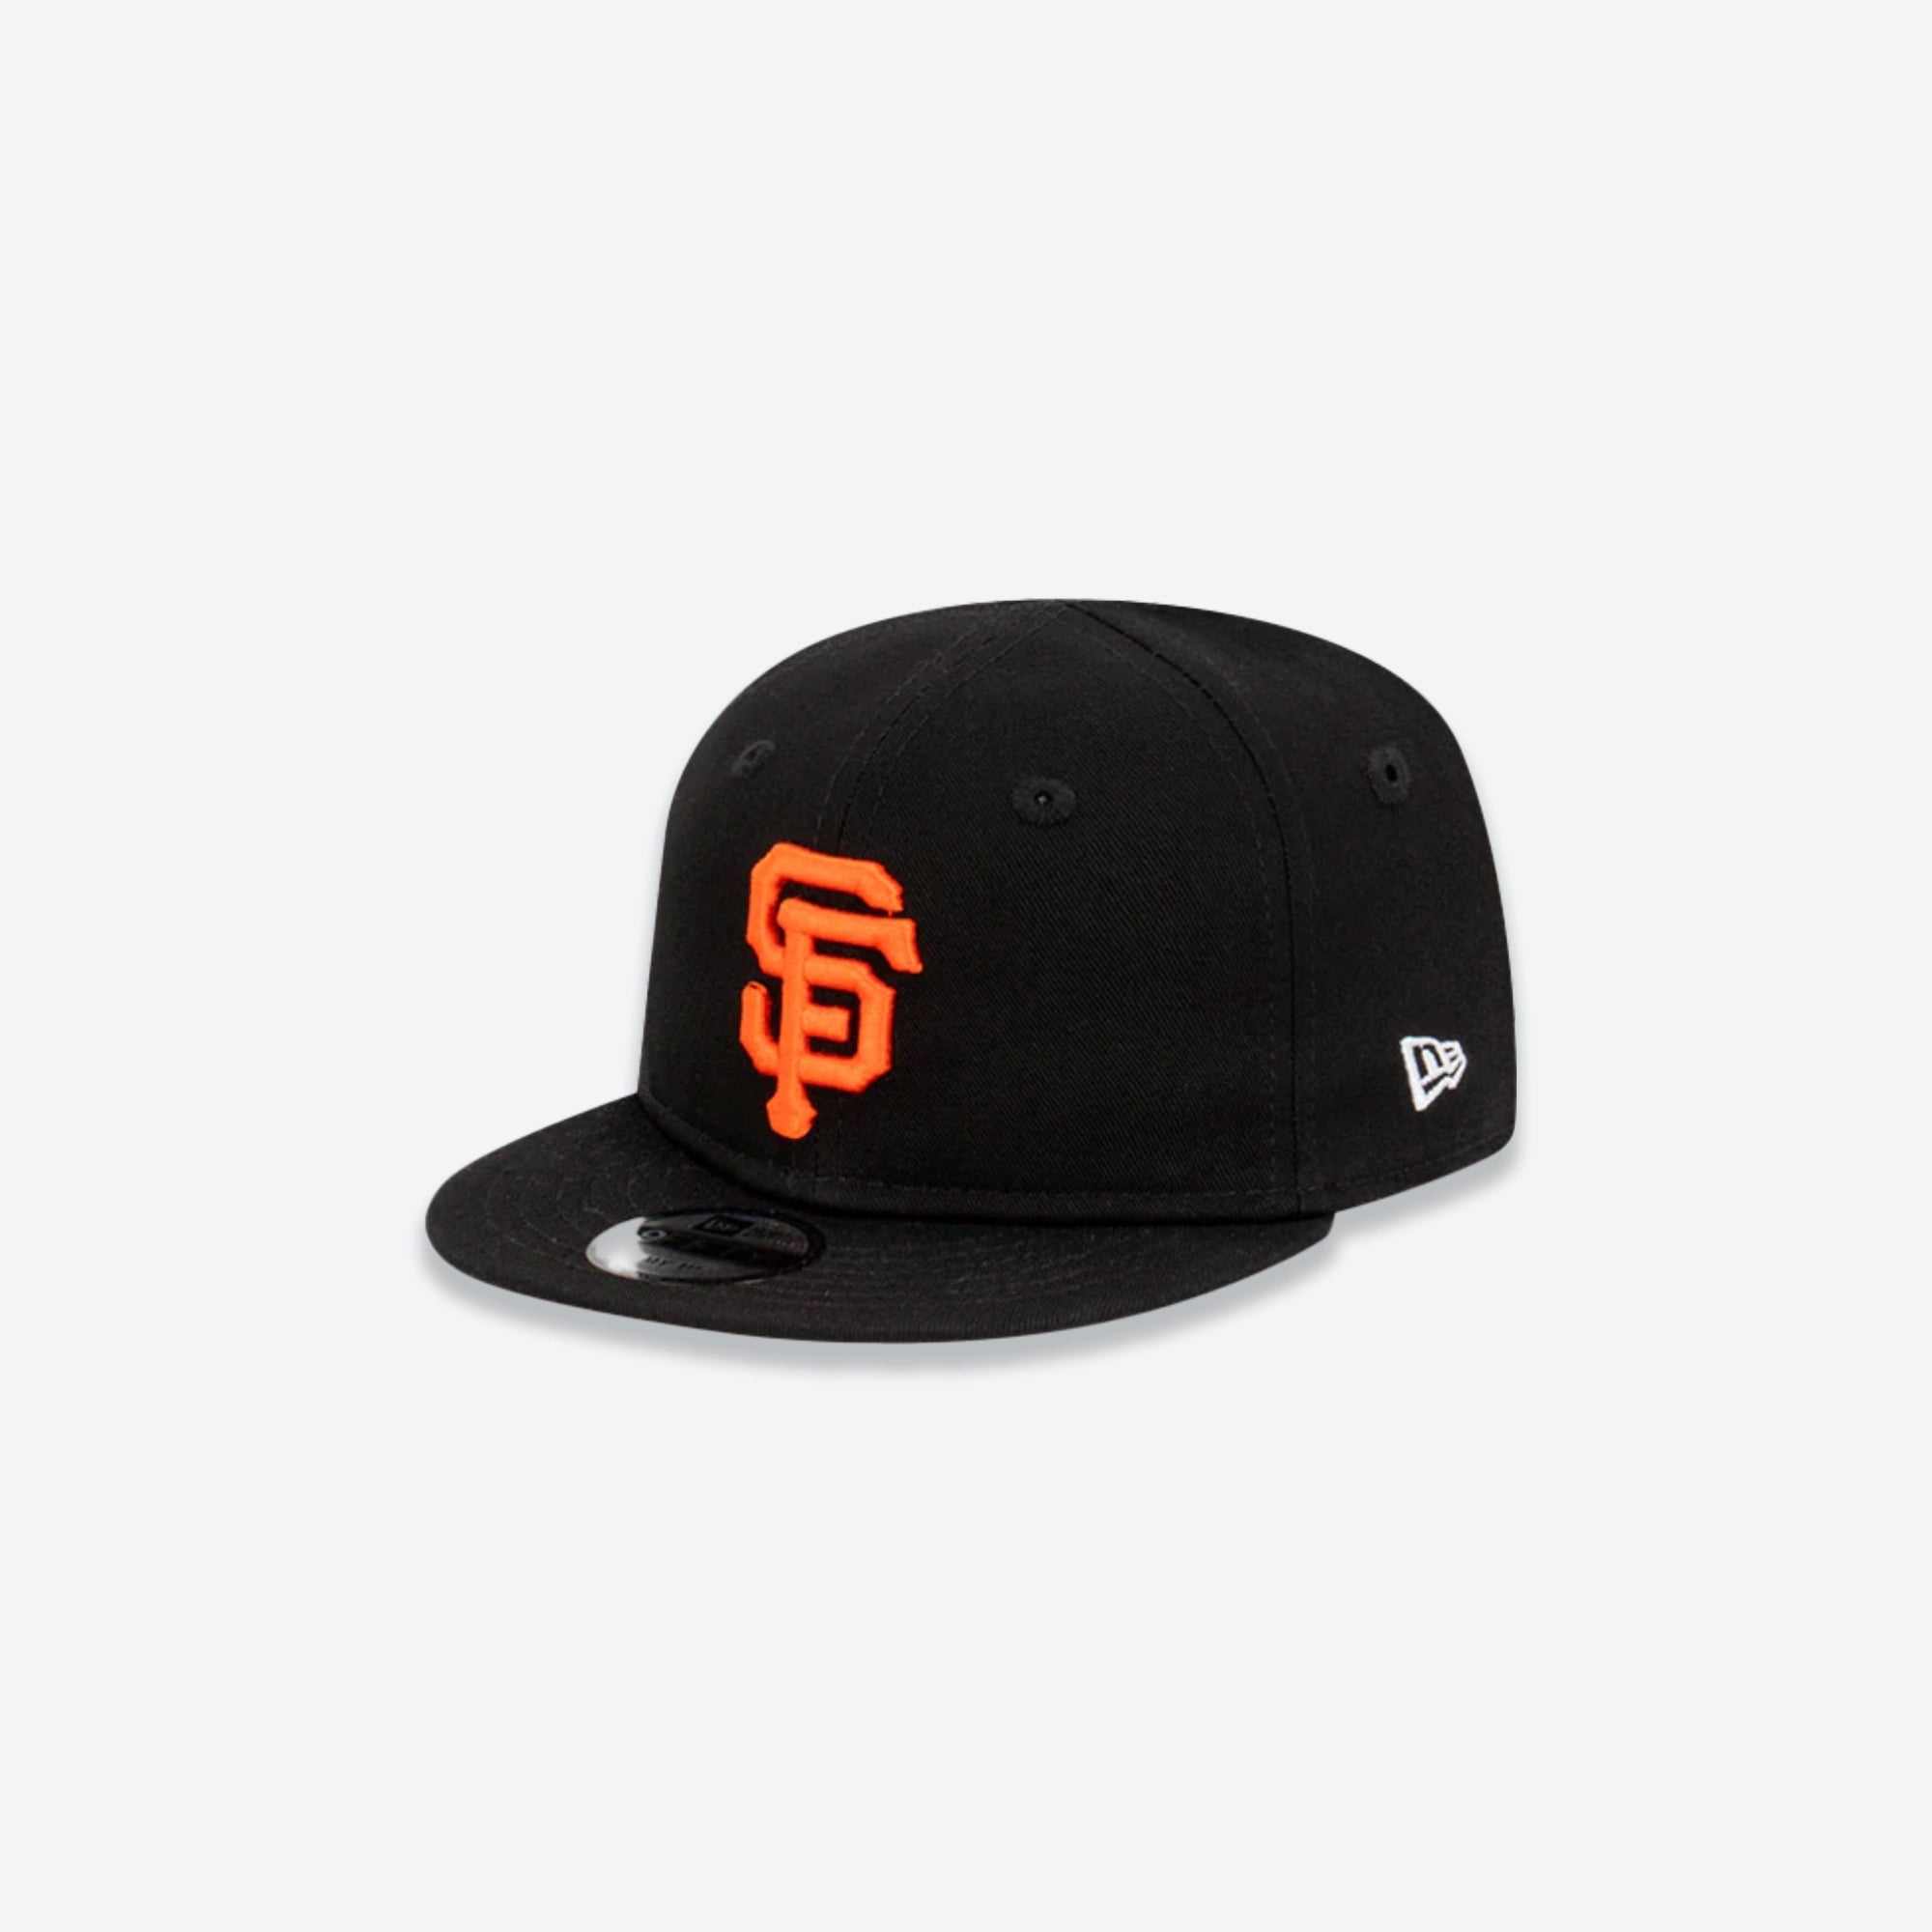 Infant New Era Black San Francisco Giants My First 9FIFTY Hat